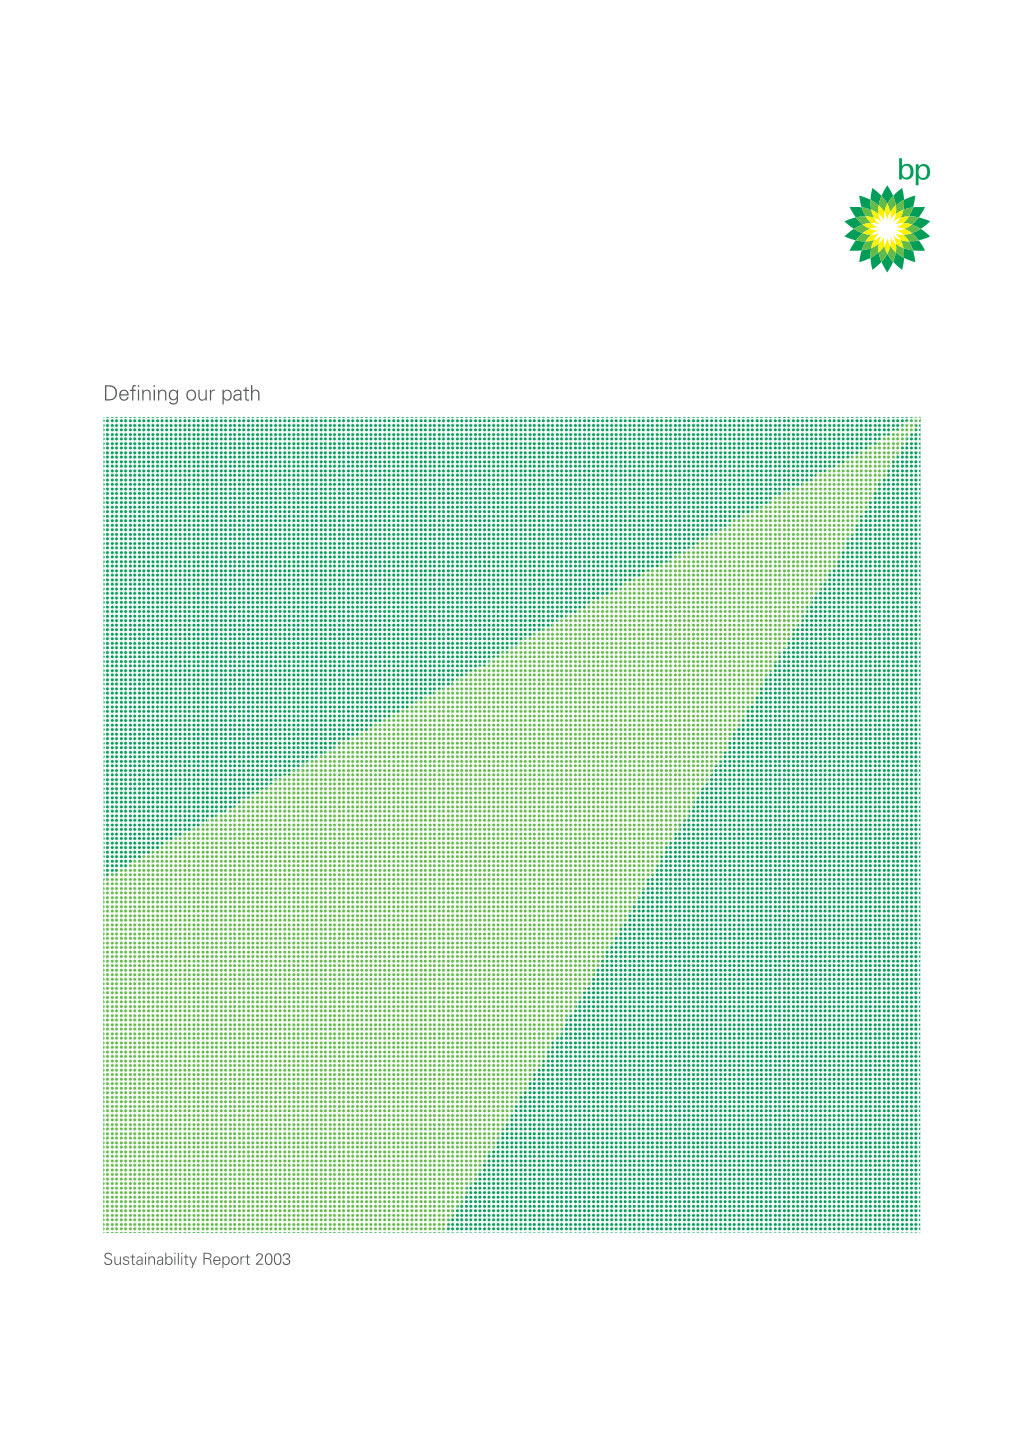 Sustainability Report – 2003 Pdf / 2.1 MB